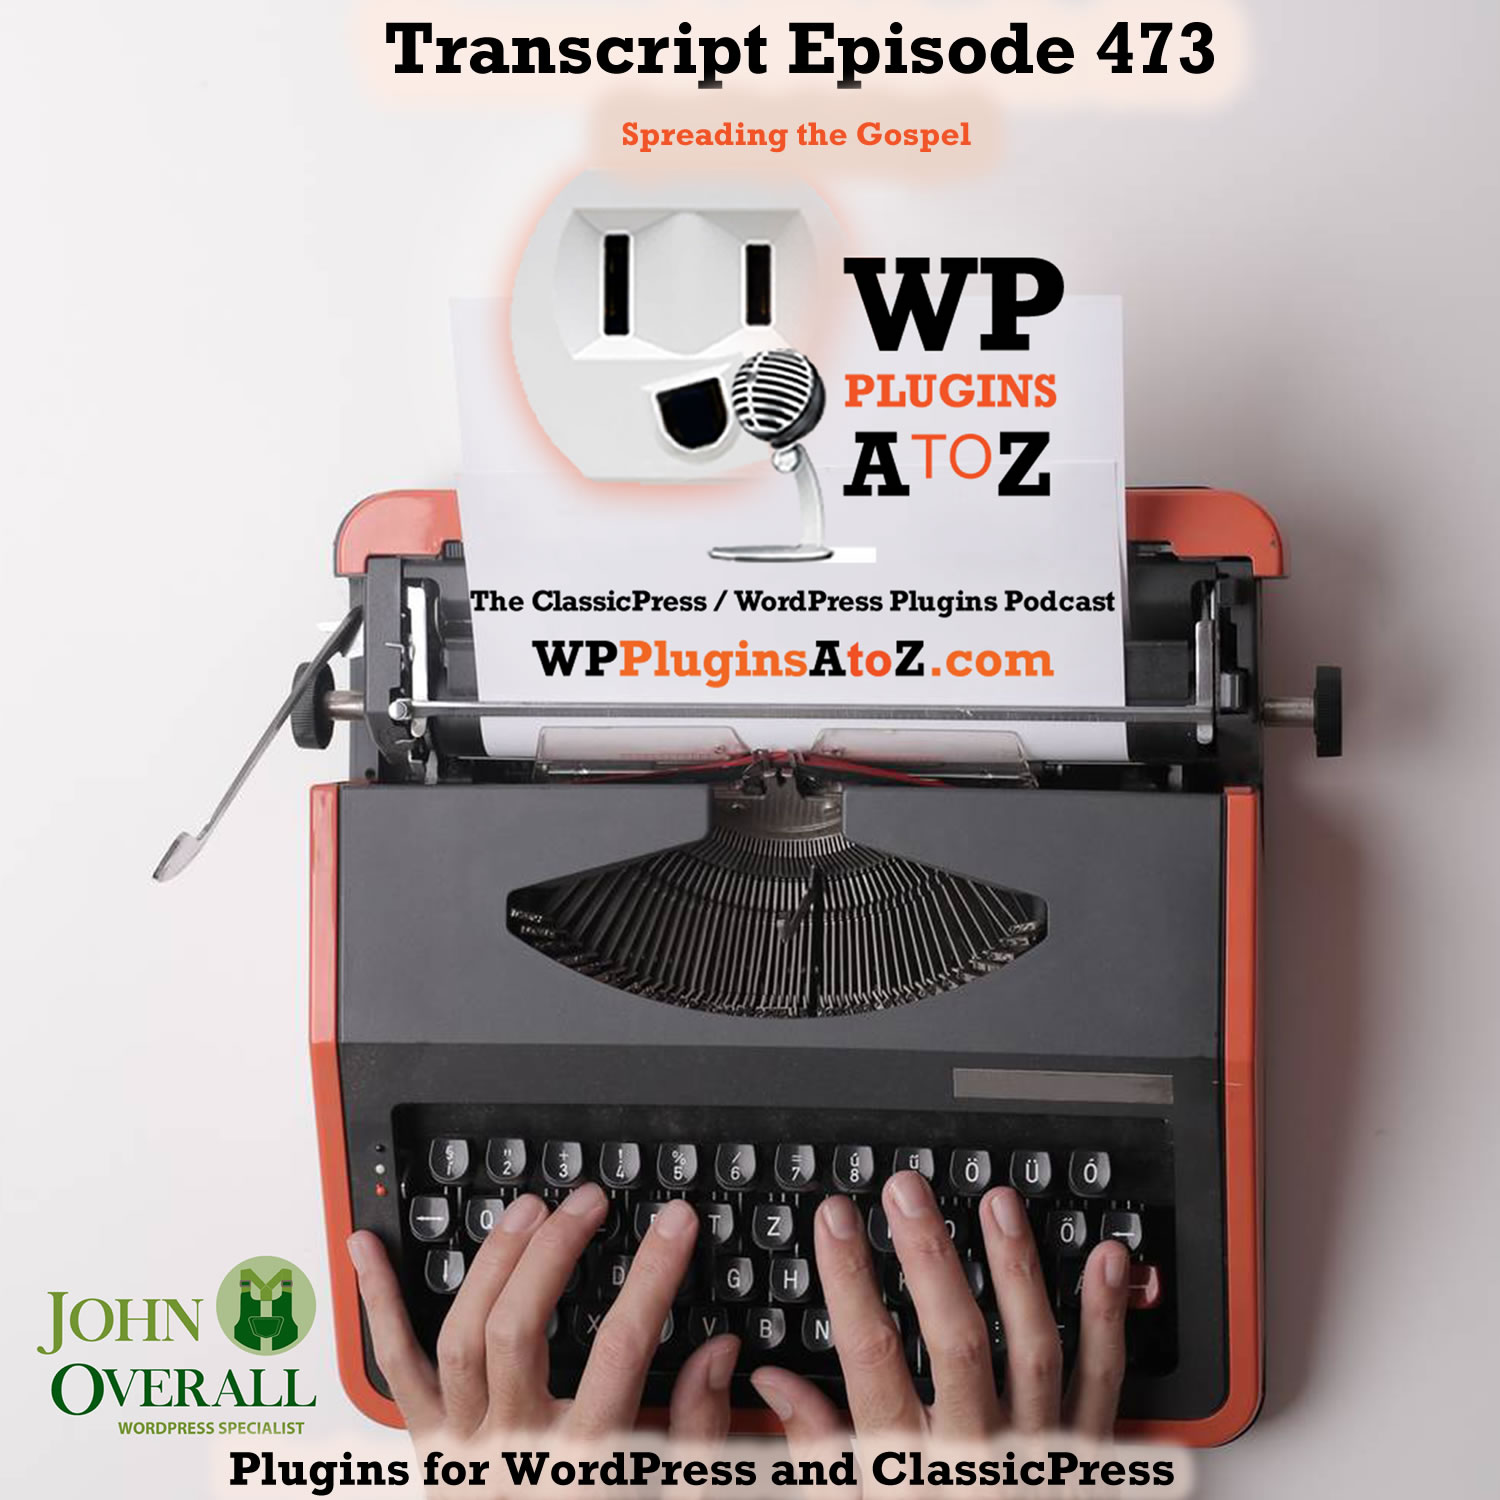 It's Episode 473 with plugins for AutoBlogging, SEO for the insane, Custom URL shortener, Session limitations, Google Photos, GuestBooks and ClassicPress Options. It's all coming up on WordPress Plugins A-Z!